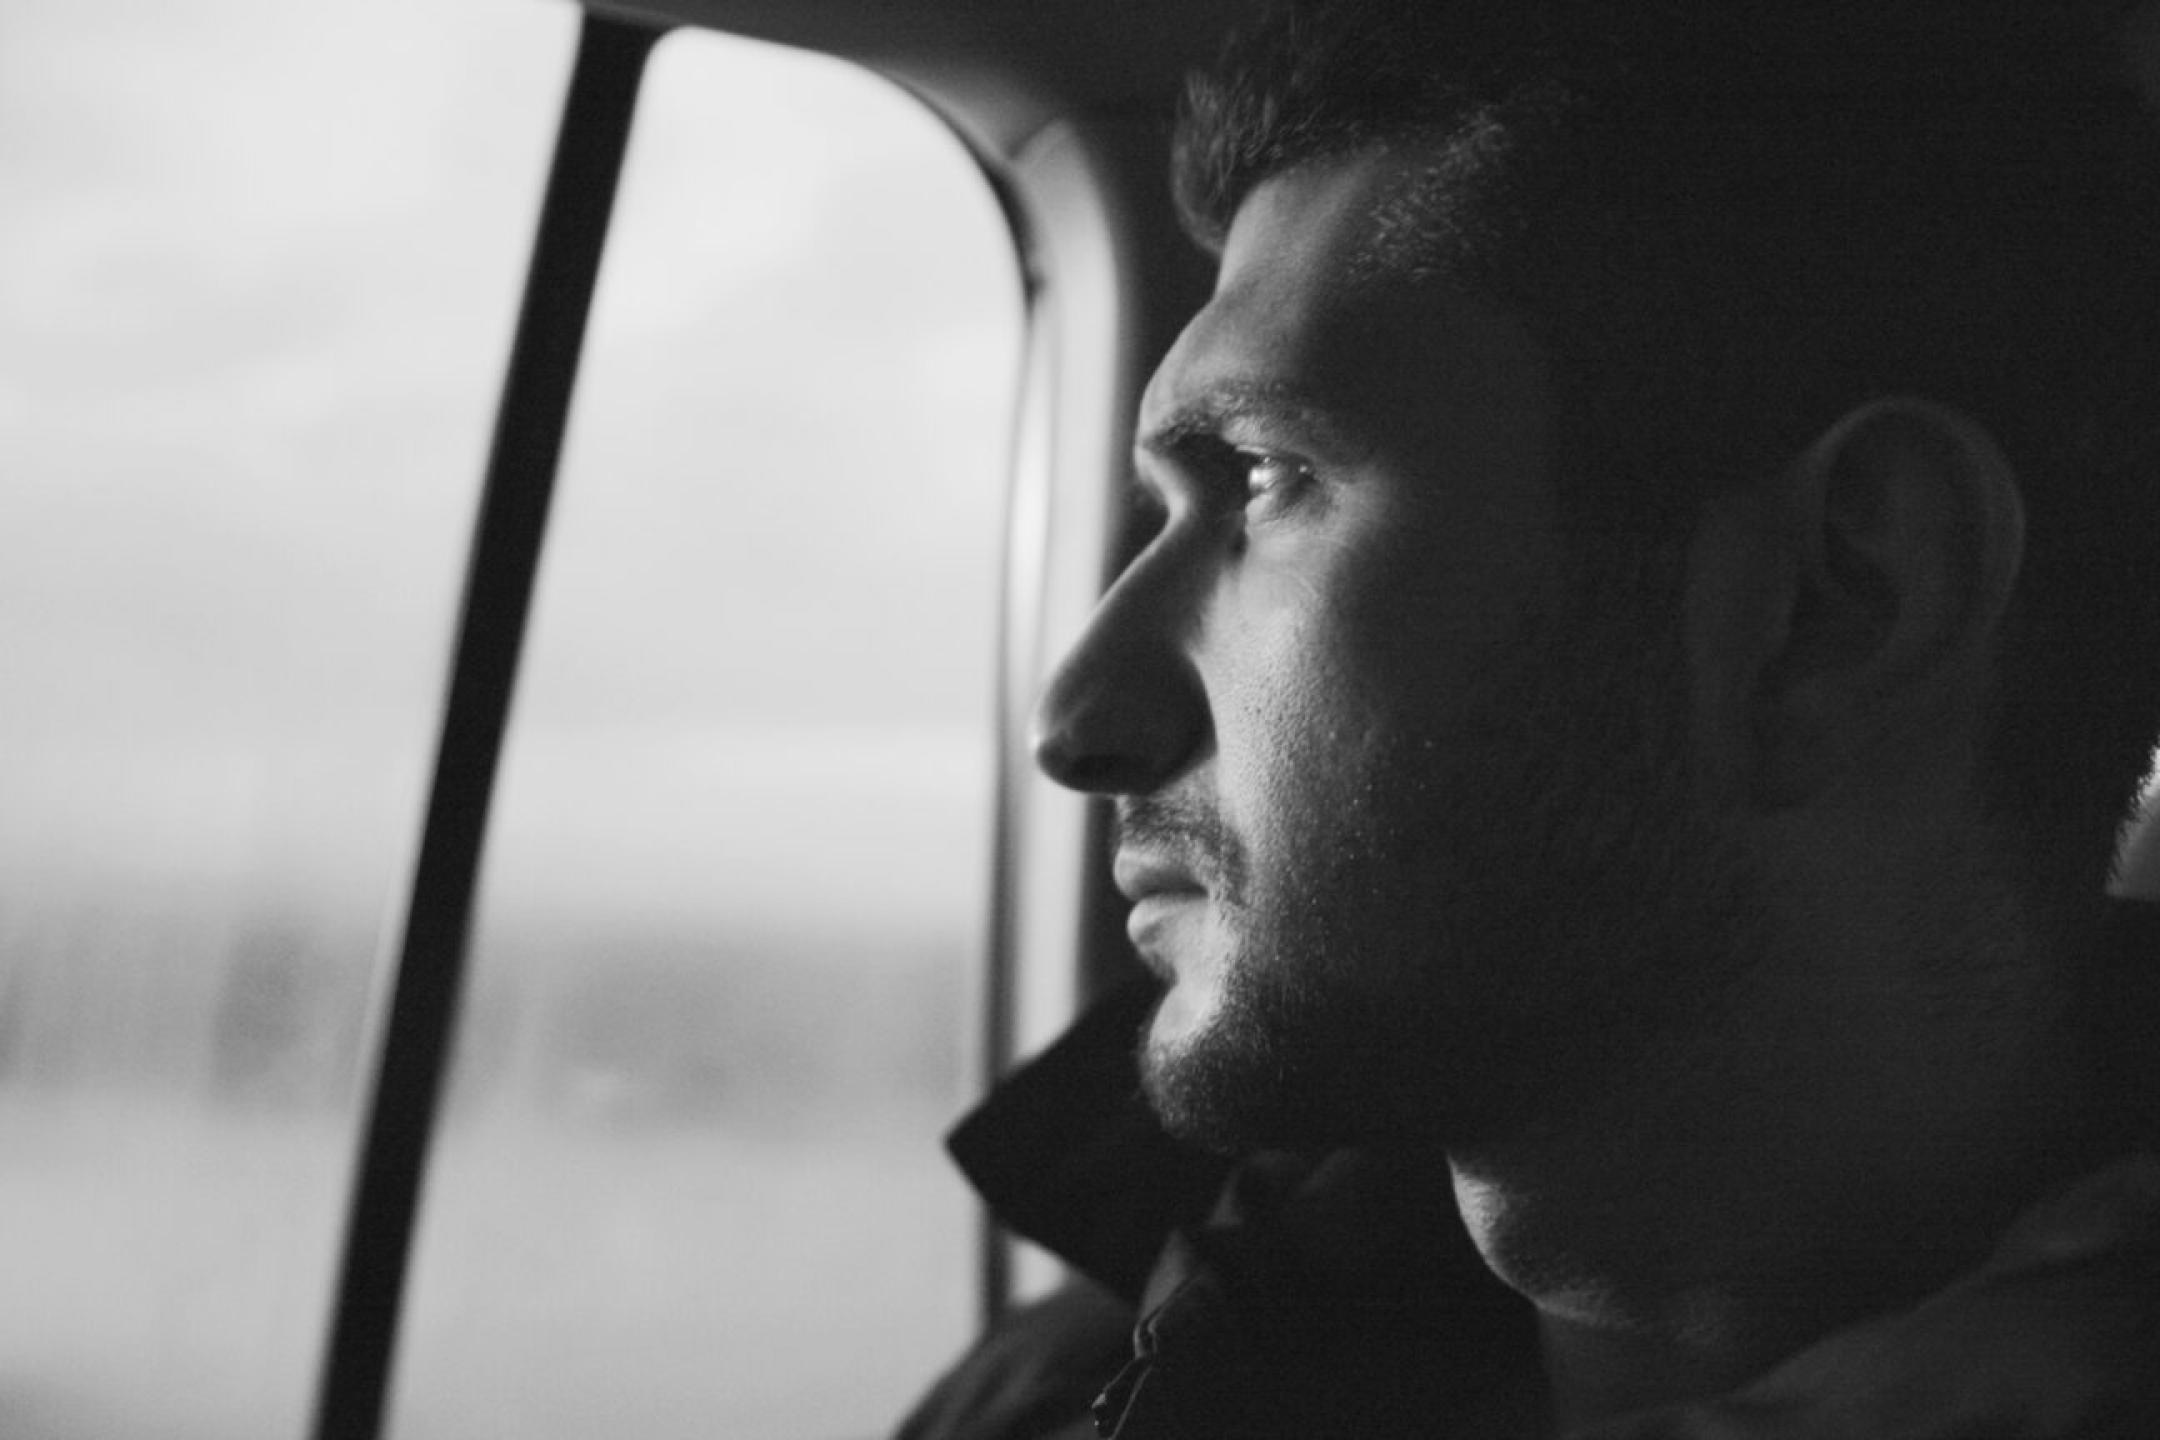 A black-and-white pic: The close-up of a man’s face in profile. He is looking out of a car window.